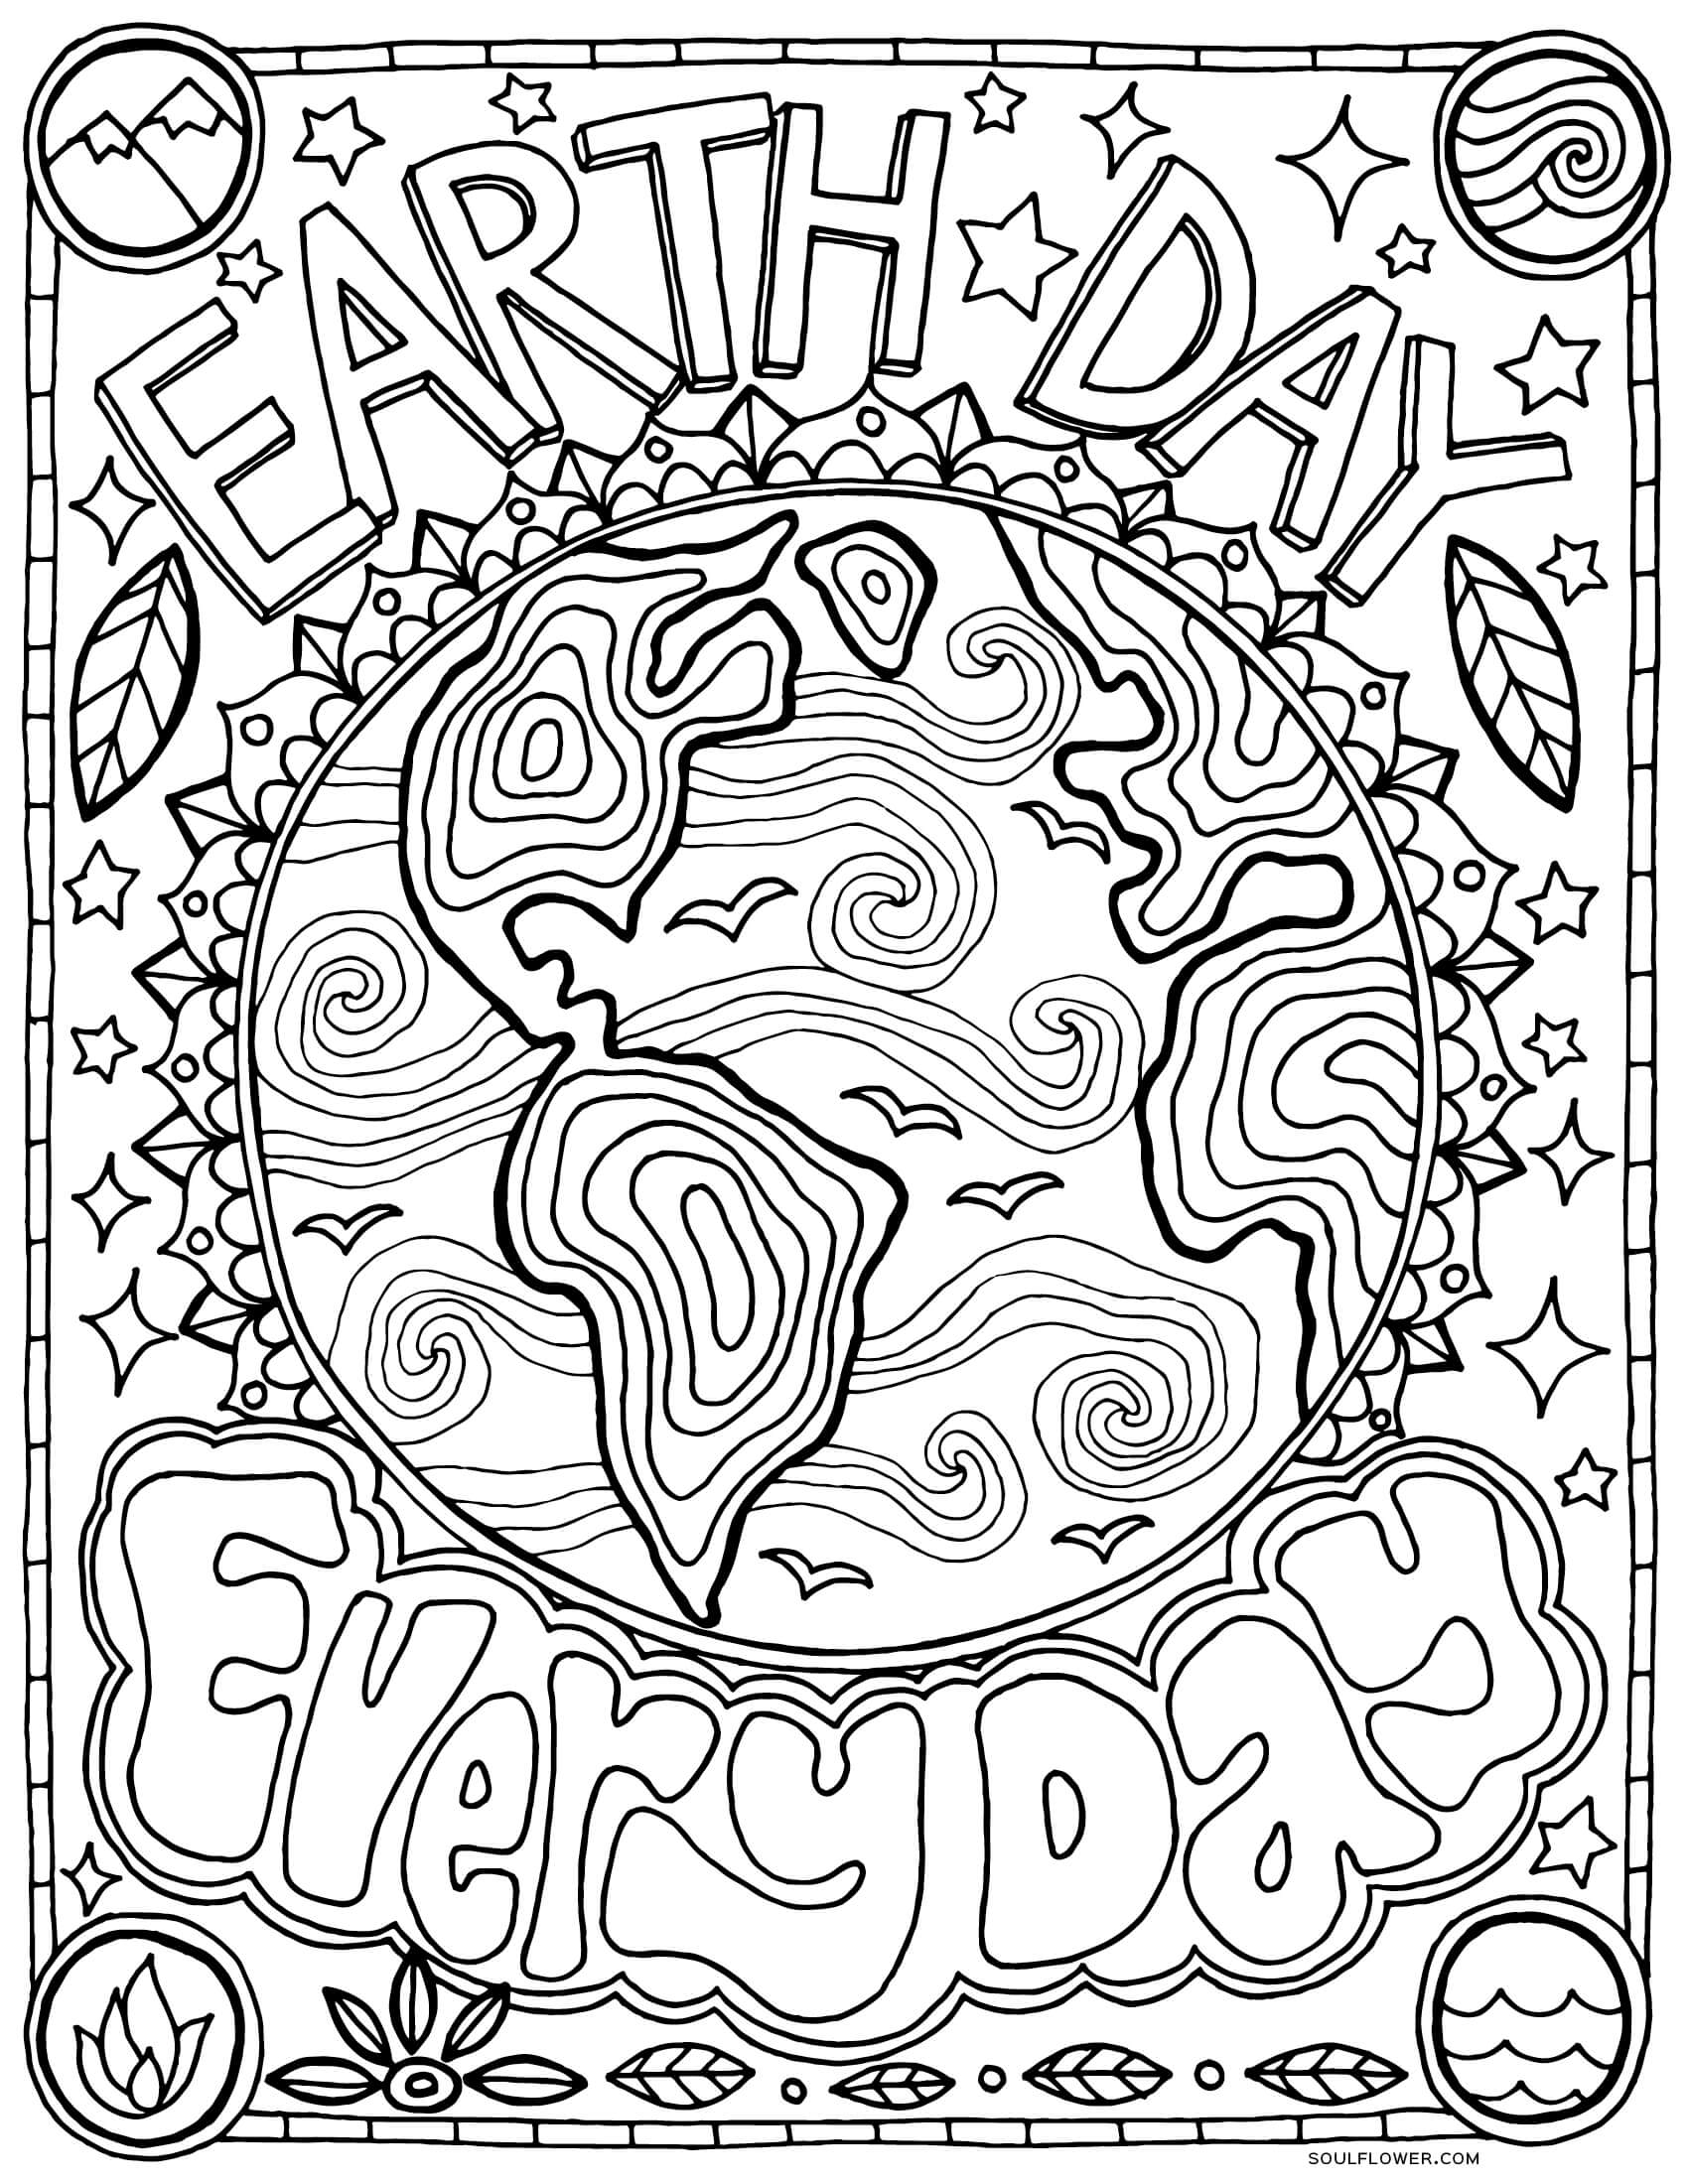 Free Earth Day Coloring Page Earth Day Every Day